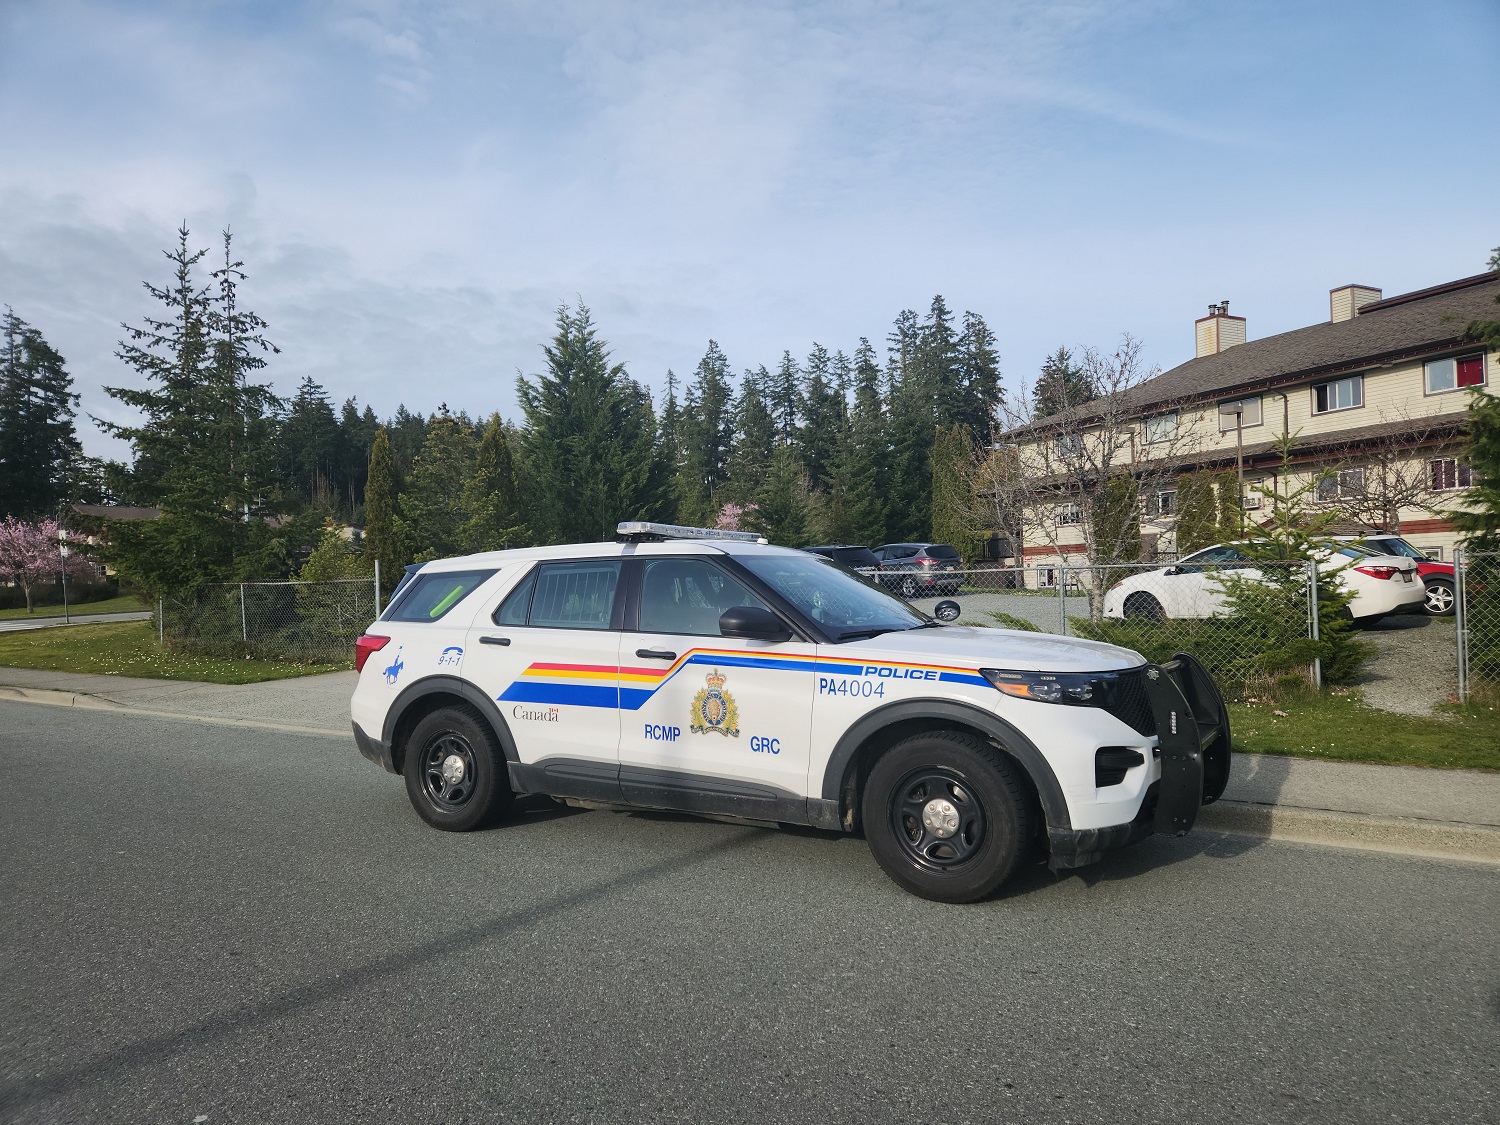 A Port Alberni police vehicle parked in front of a housing unit